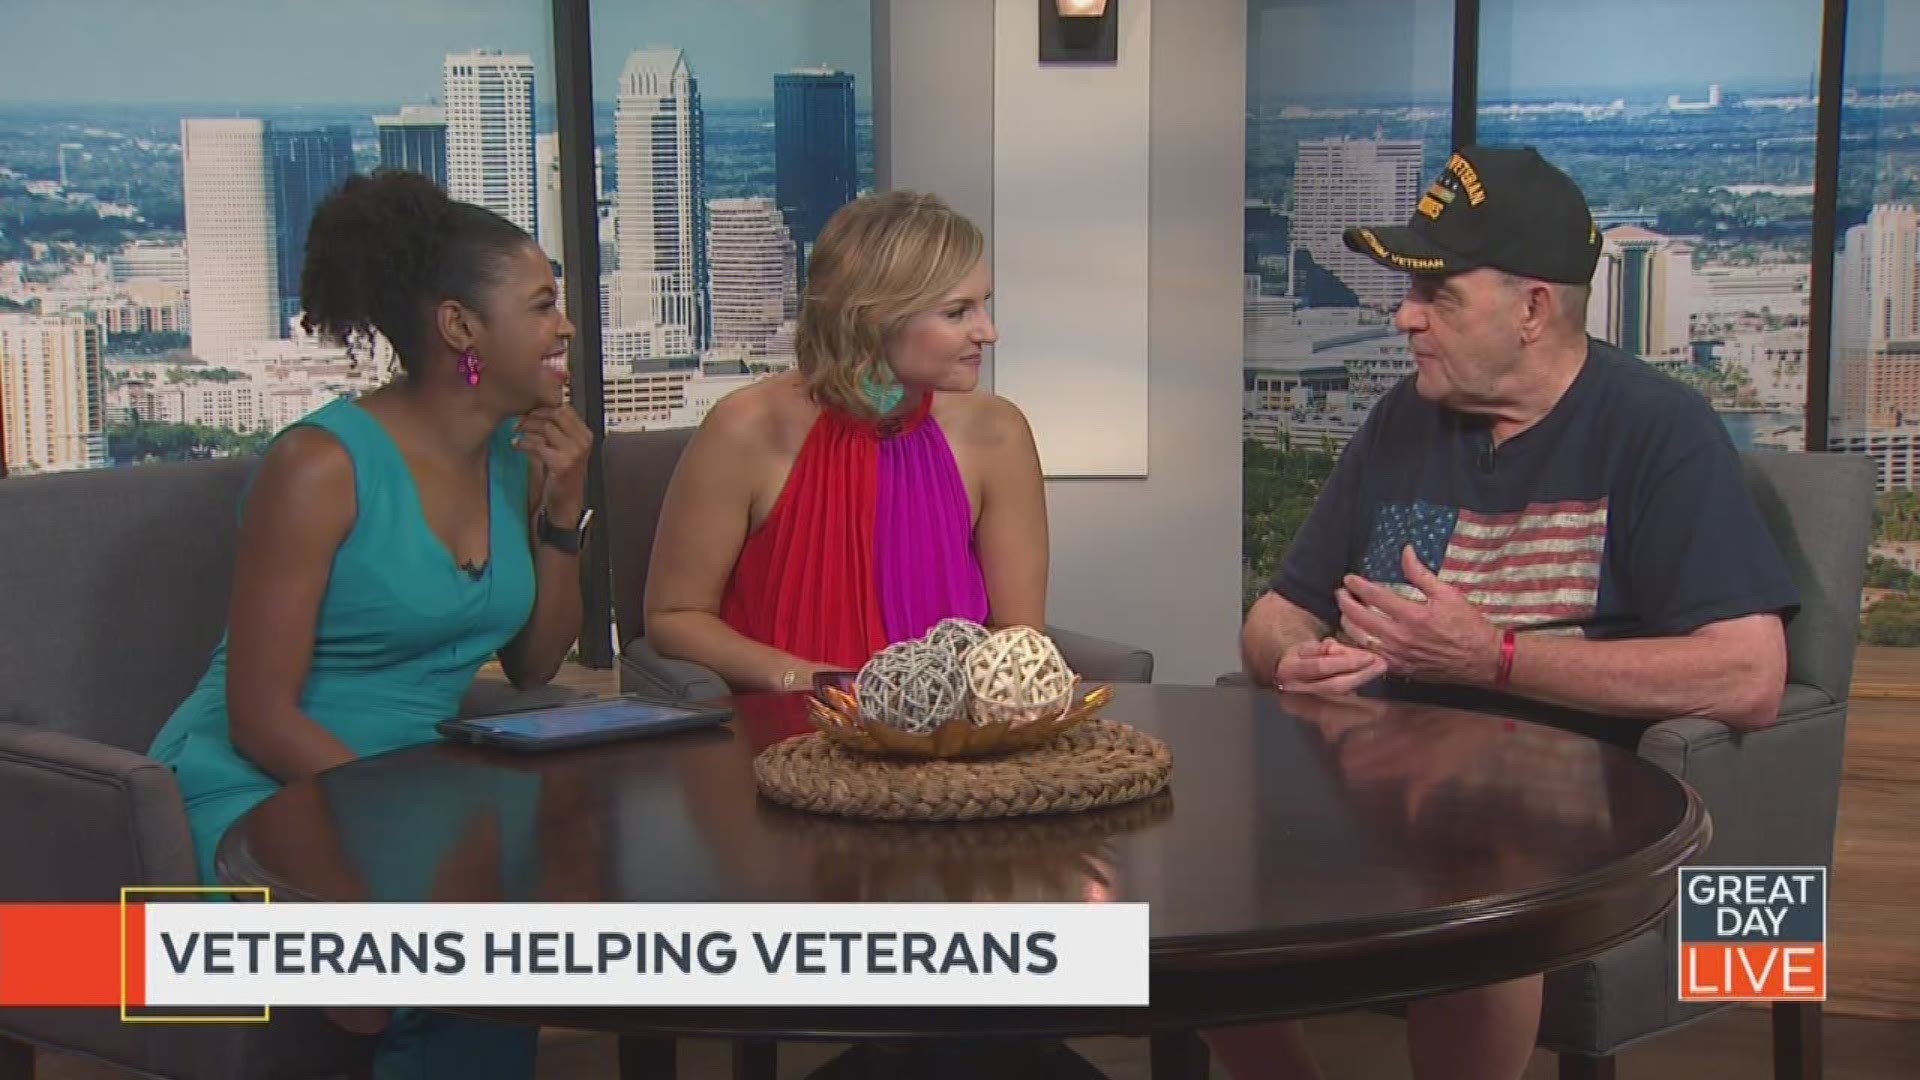 Many veterans in our area are choosing to still serve by volunteering at Suncoast Hospice. Former Marine and Army soldier Mike Couper stopped by to share his experiences. You can find out more by going to suncoasthospice.org/veterans-programs.